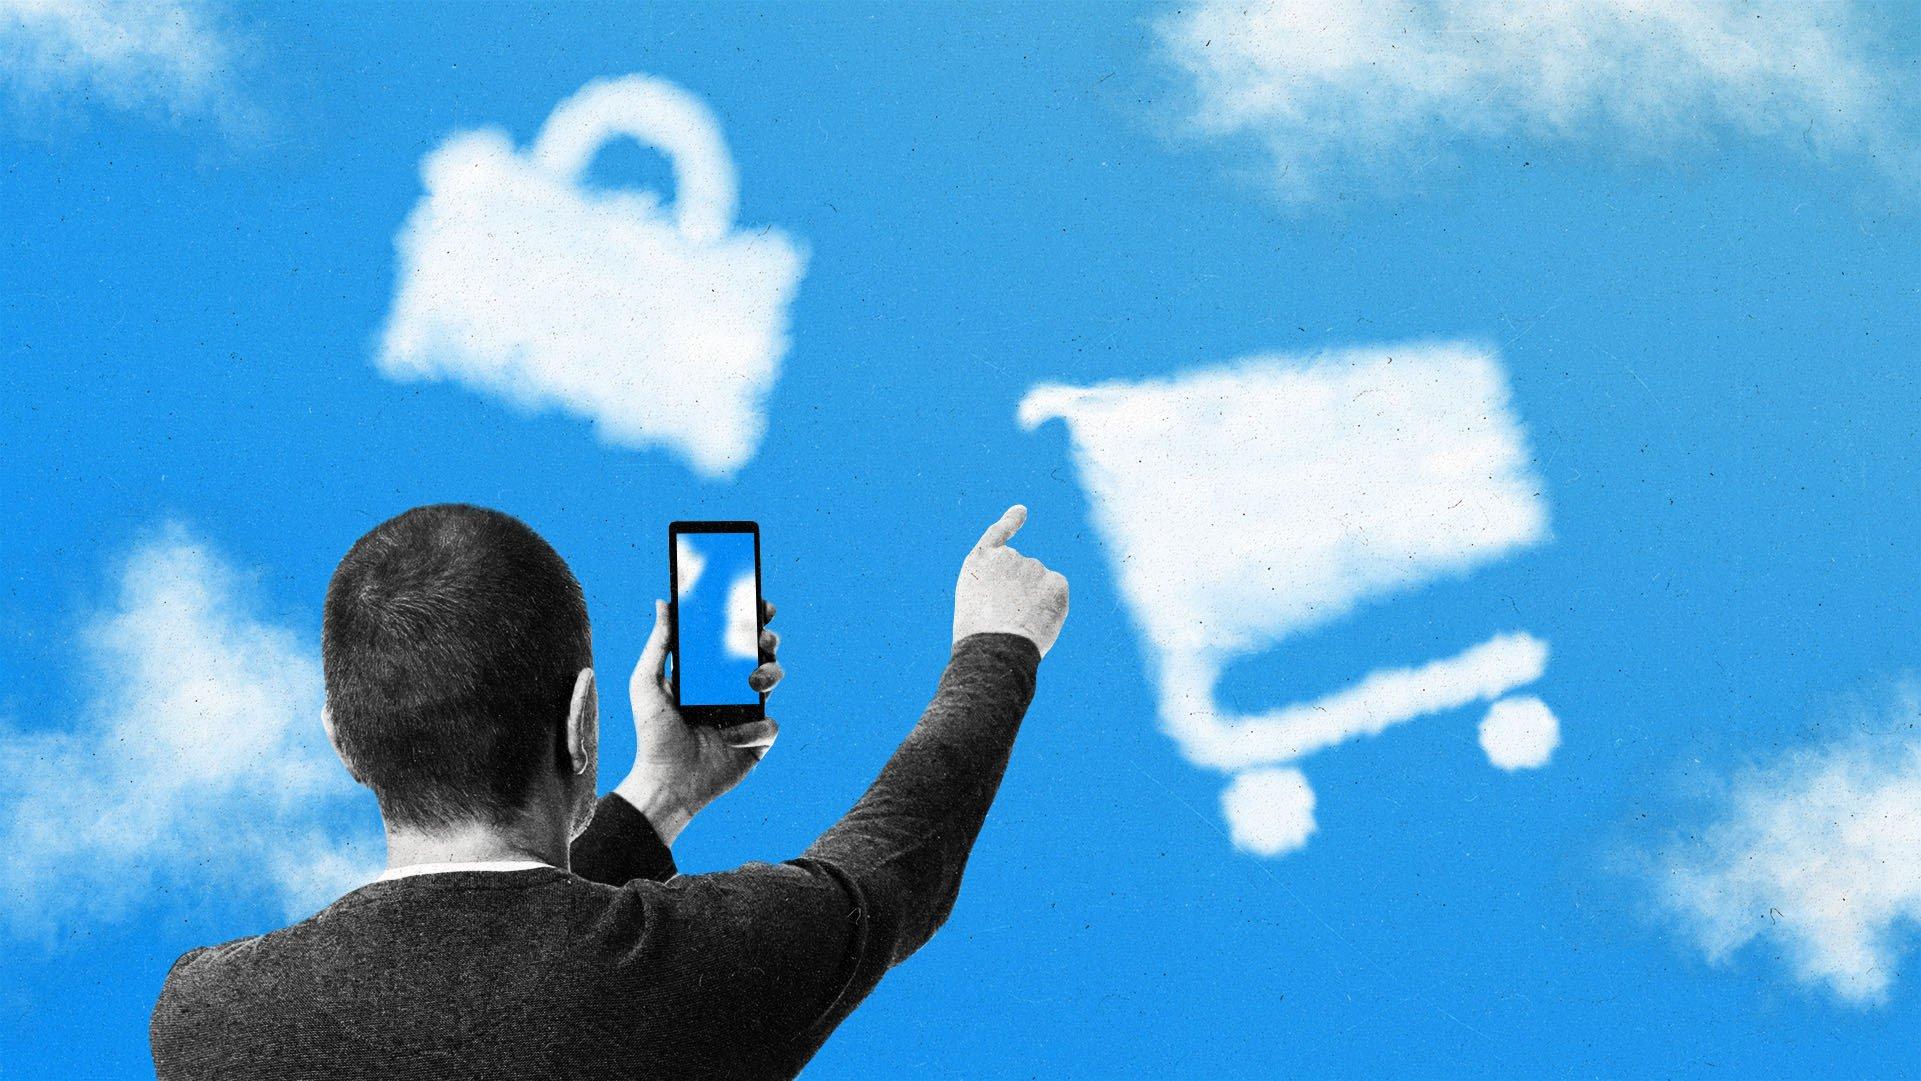 Person shown from behind pointing at the sky, with clouds shaped like a shopping bag and shopping cart.